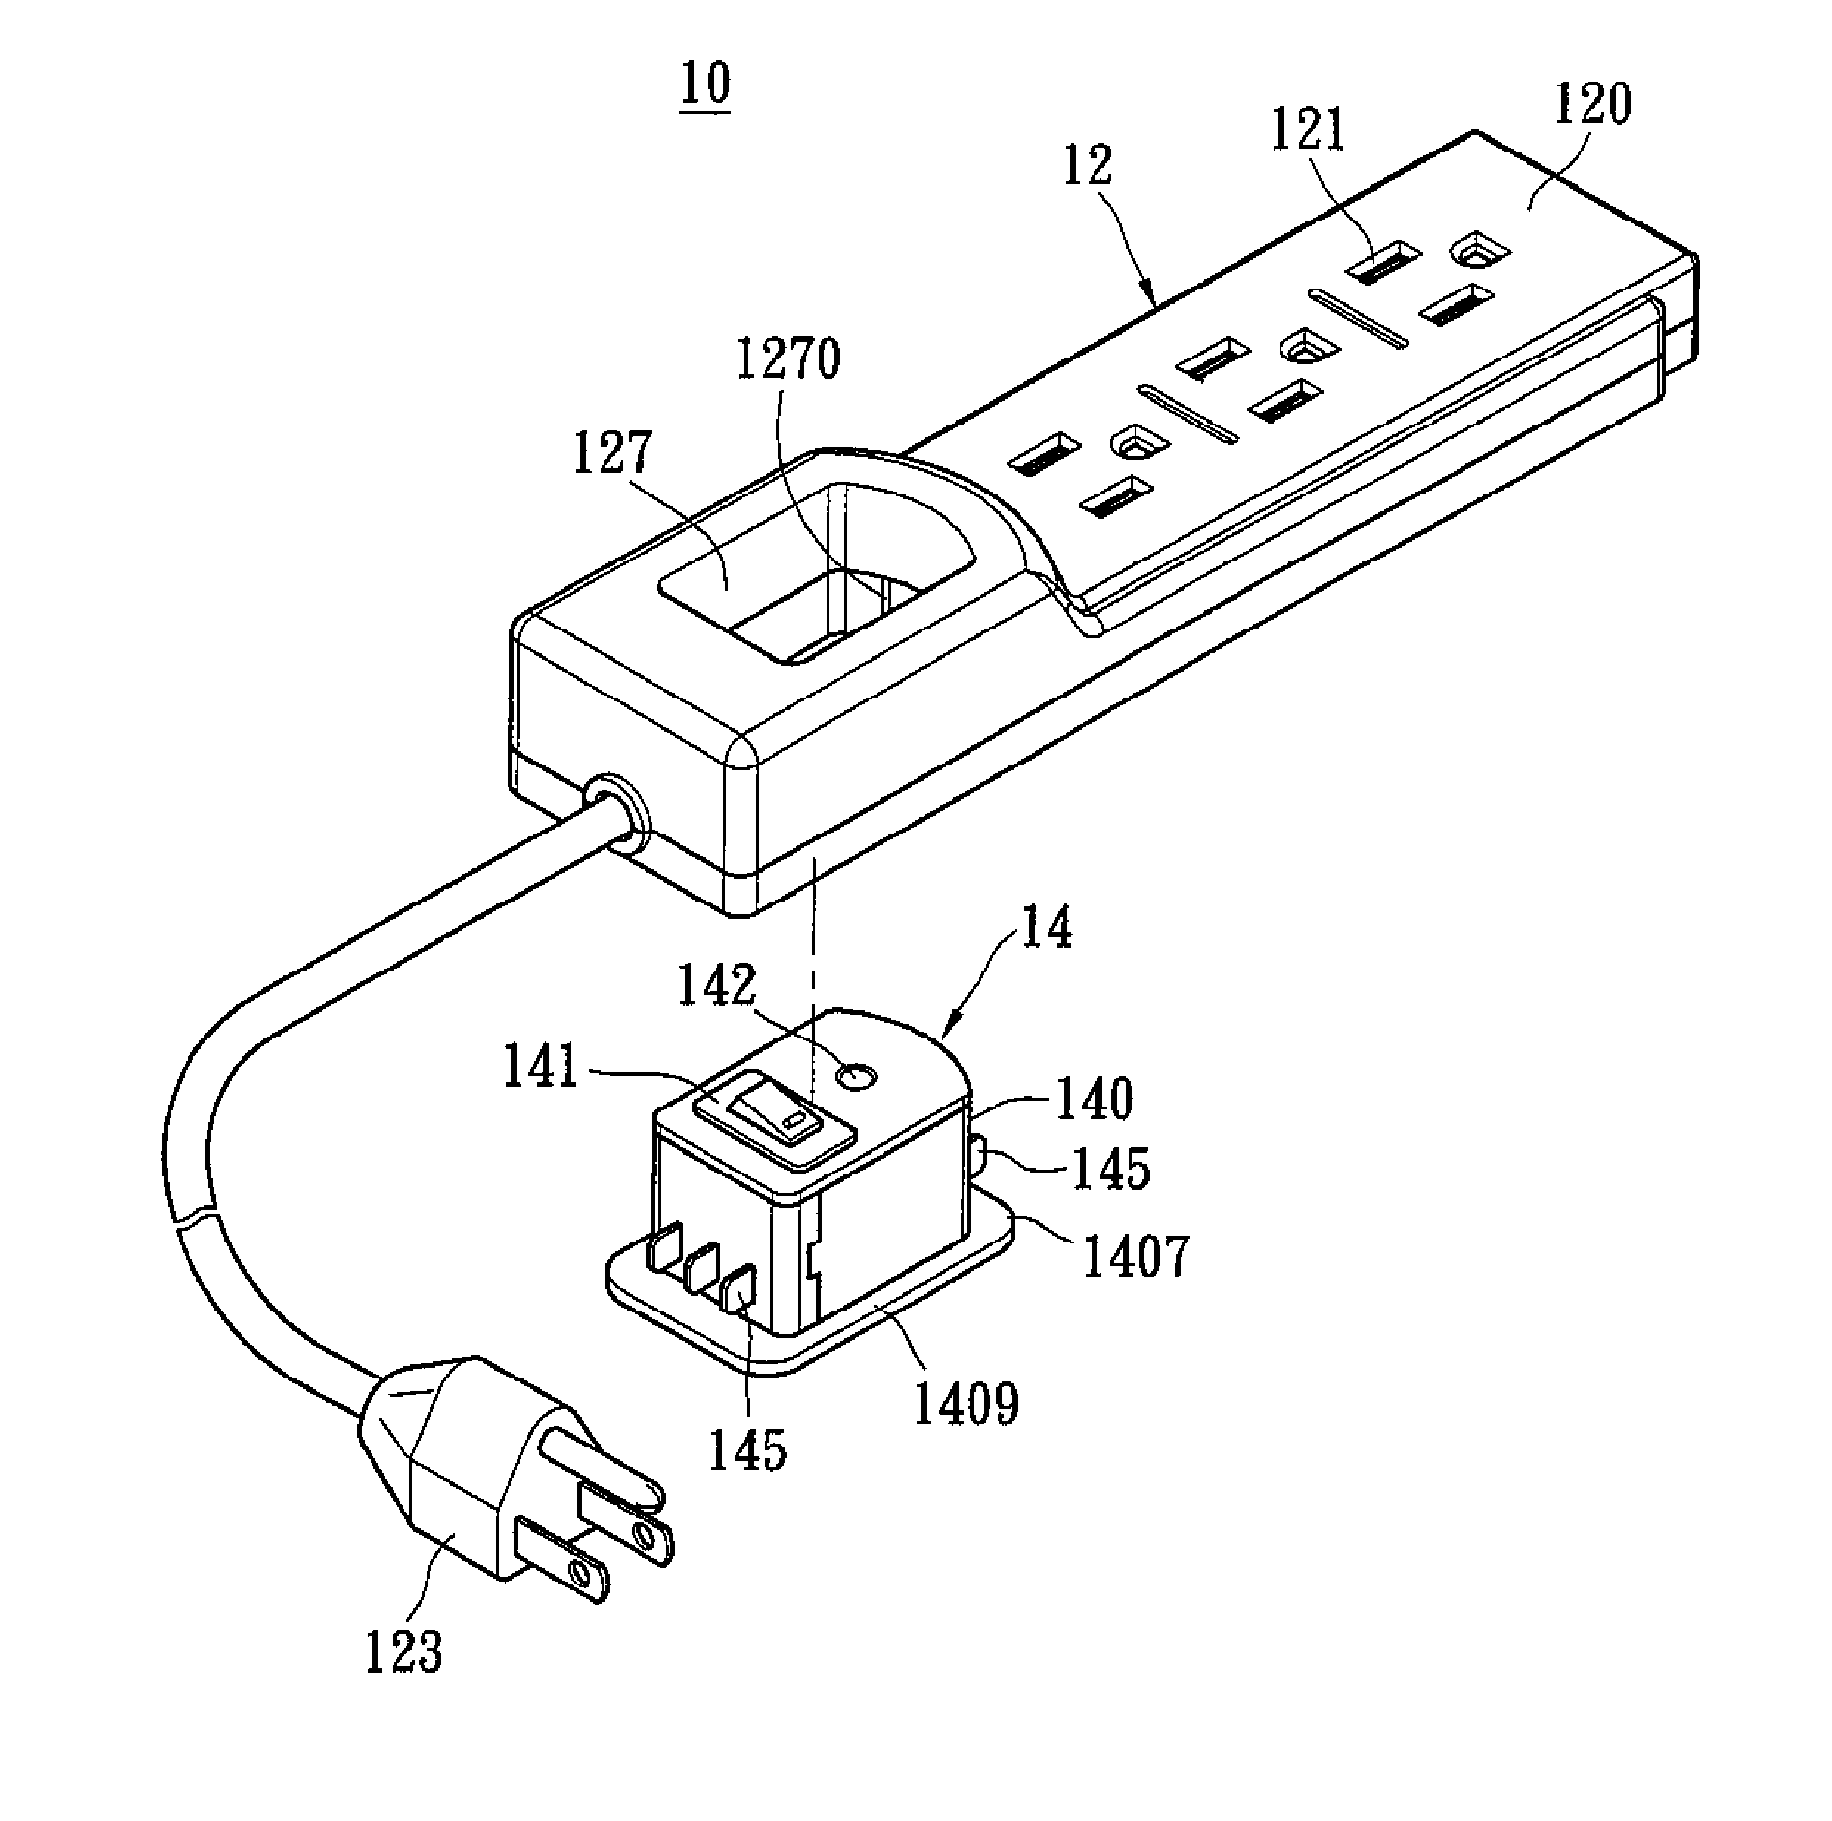 Electric receptacle apparatus with replaceable protection module